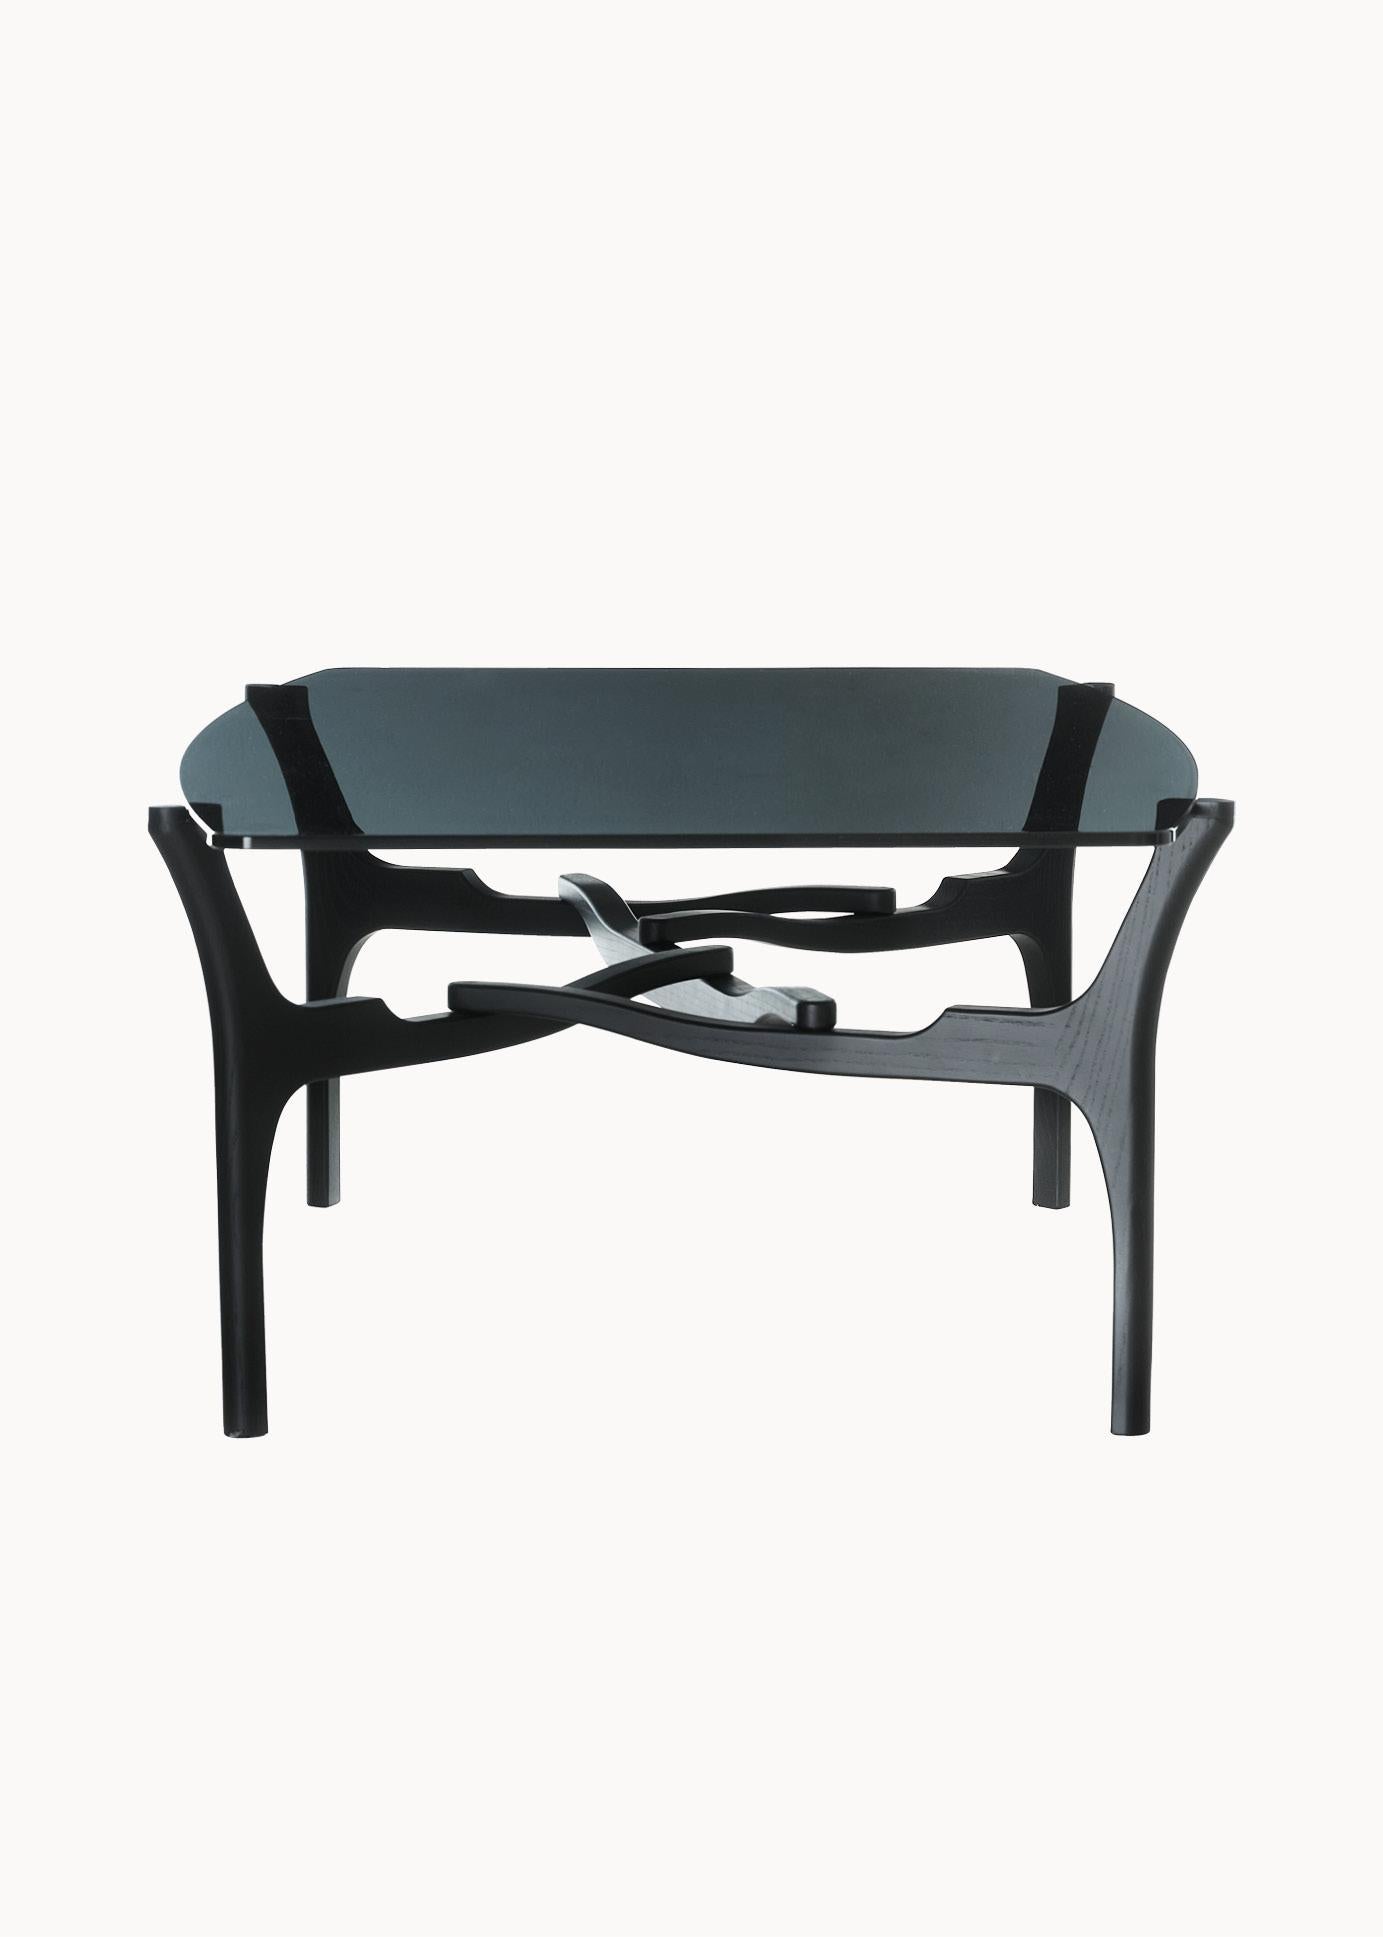 Cheekily calling to Carlo Mollino’s greater influence on Oscar Tusquets, 
these tables were named Carlinas. Their clear surface exposes the
now-visual supporting structures. Like Mollino’s nature-informed pieces, 
the Carlinas boast punctuating